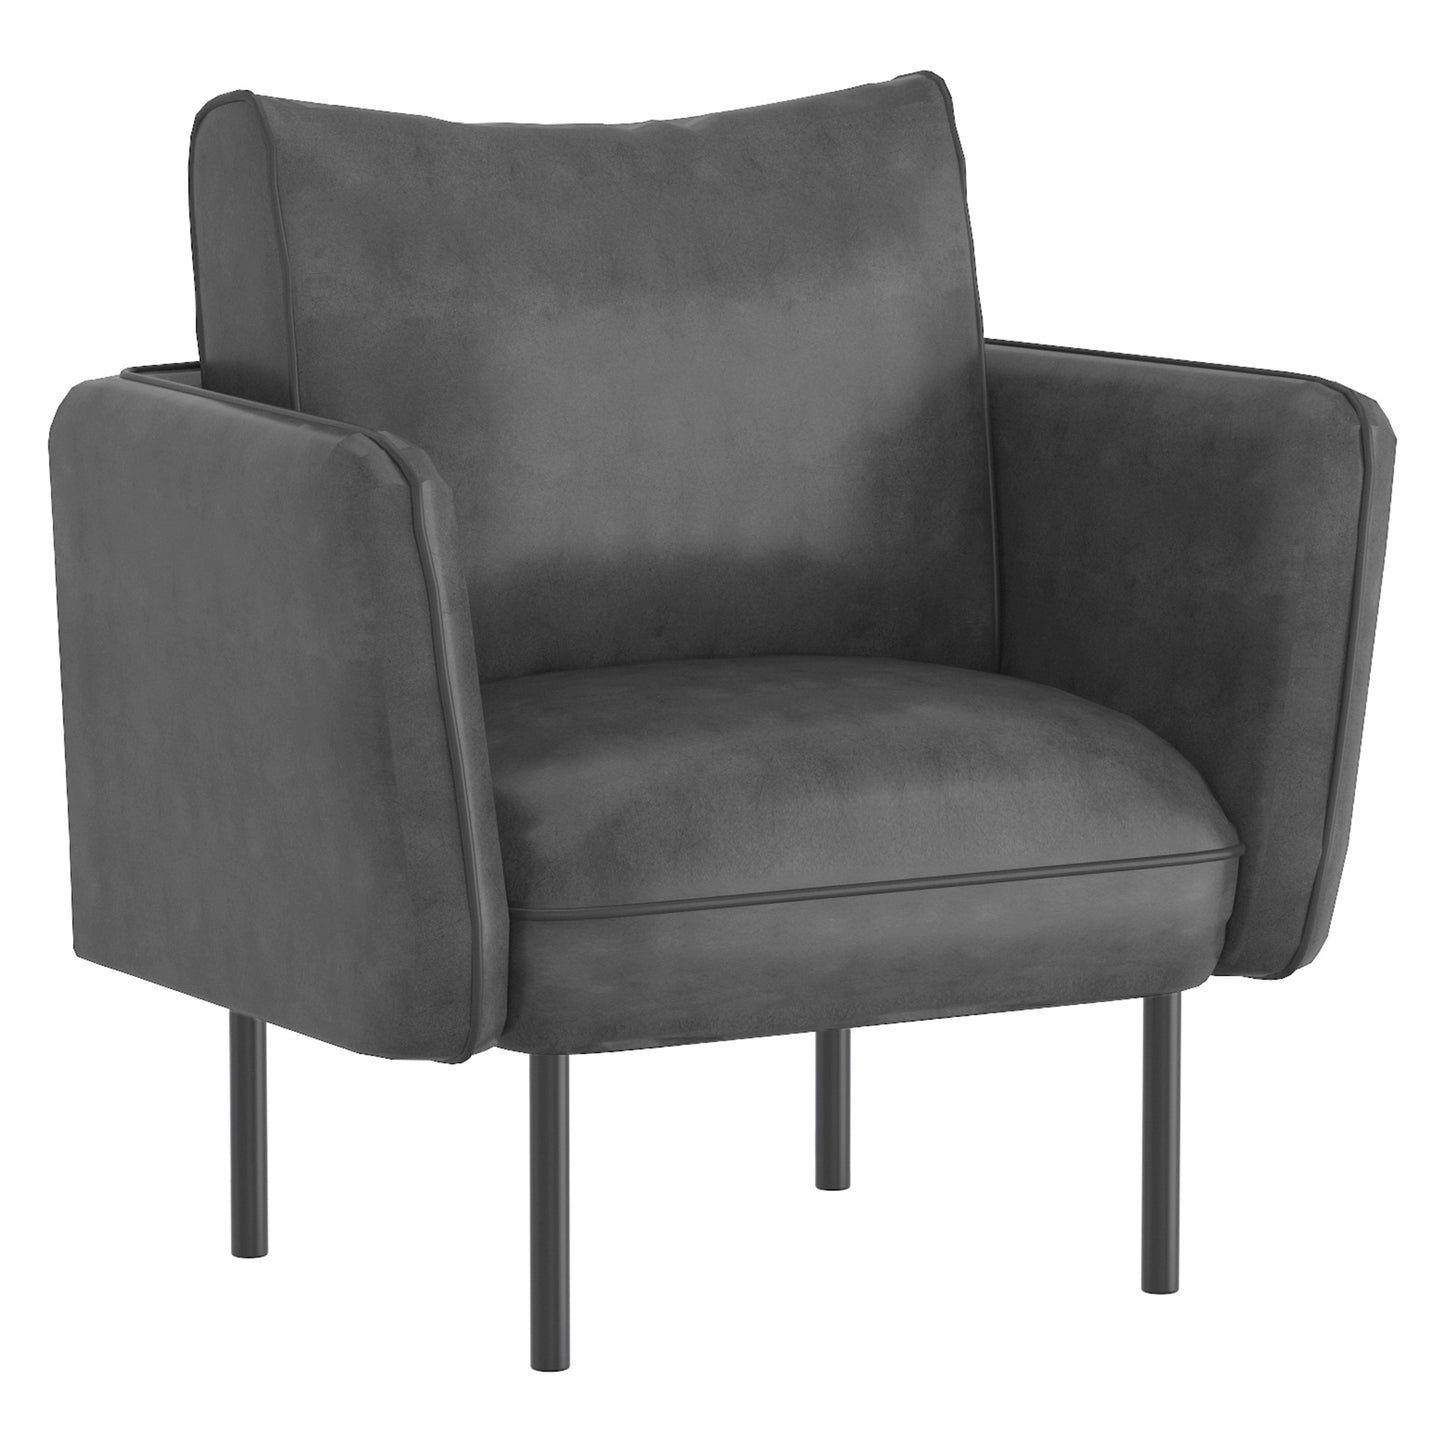 Ryker Accent Chair in Grey and Black - WW